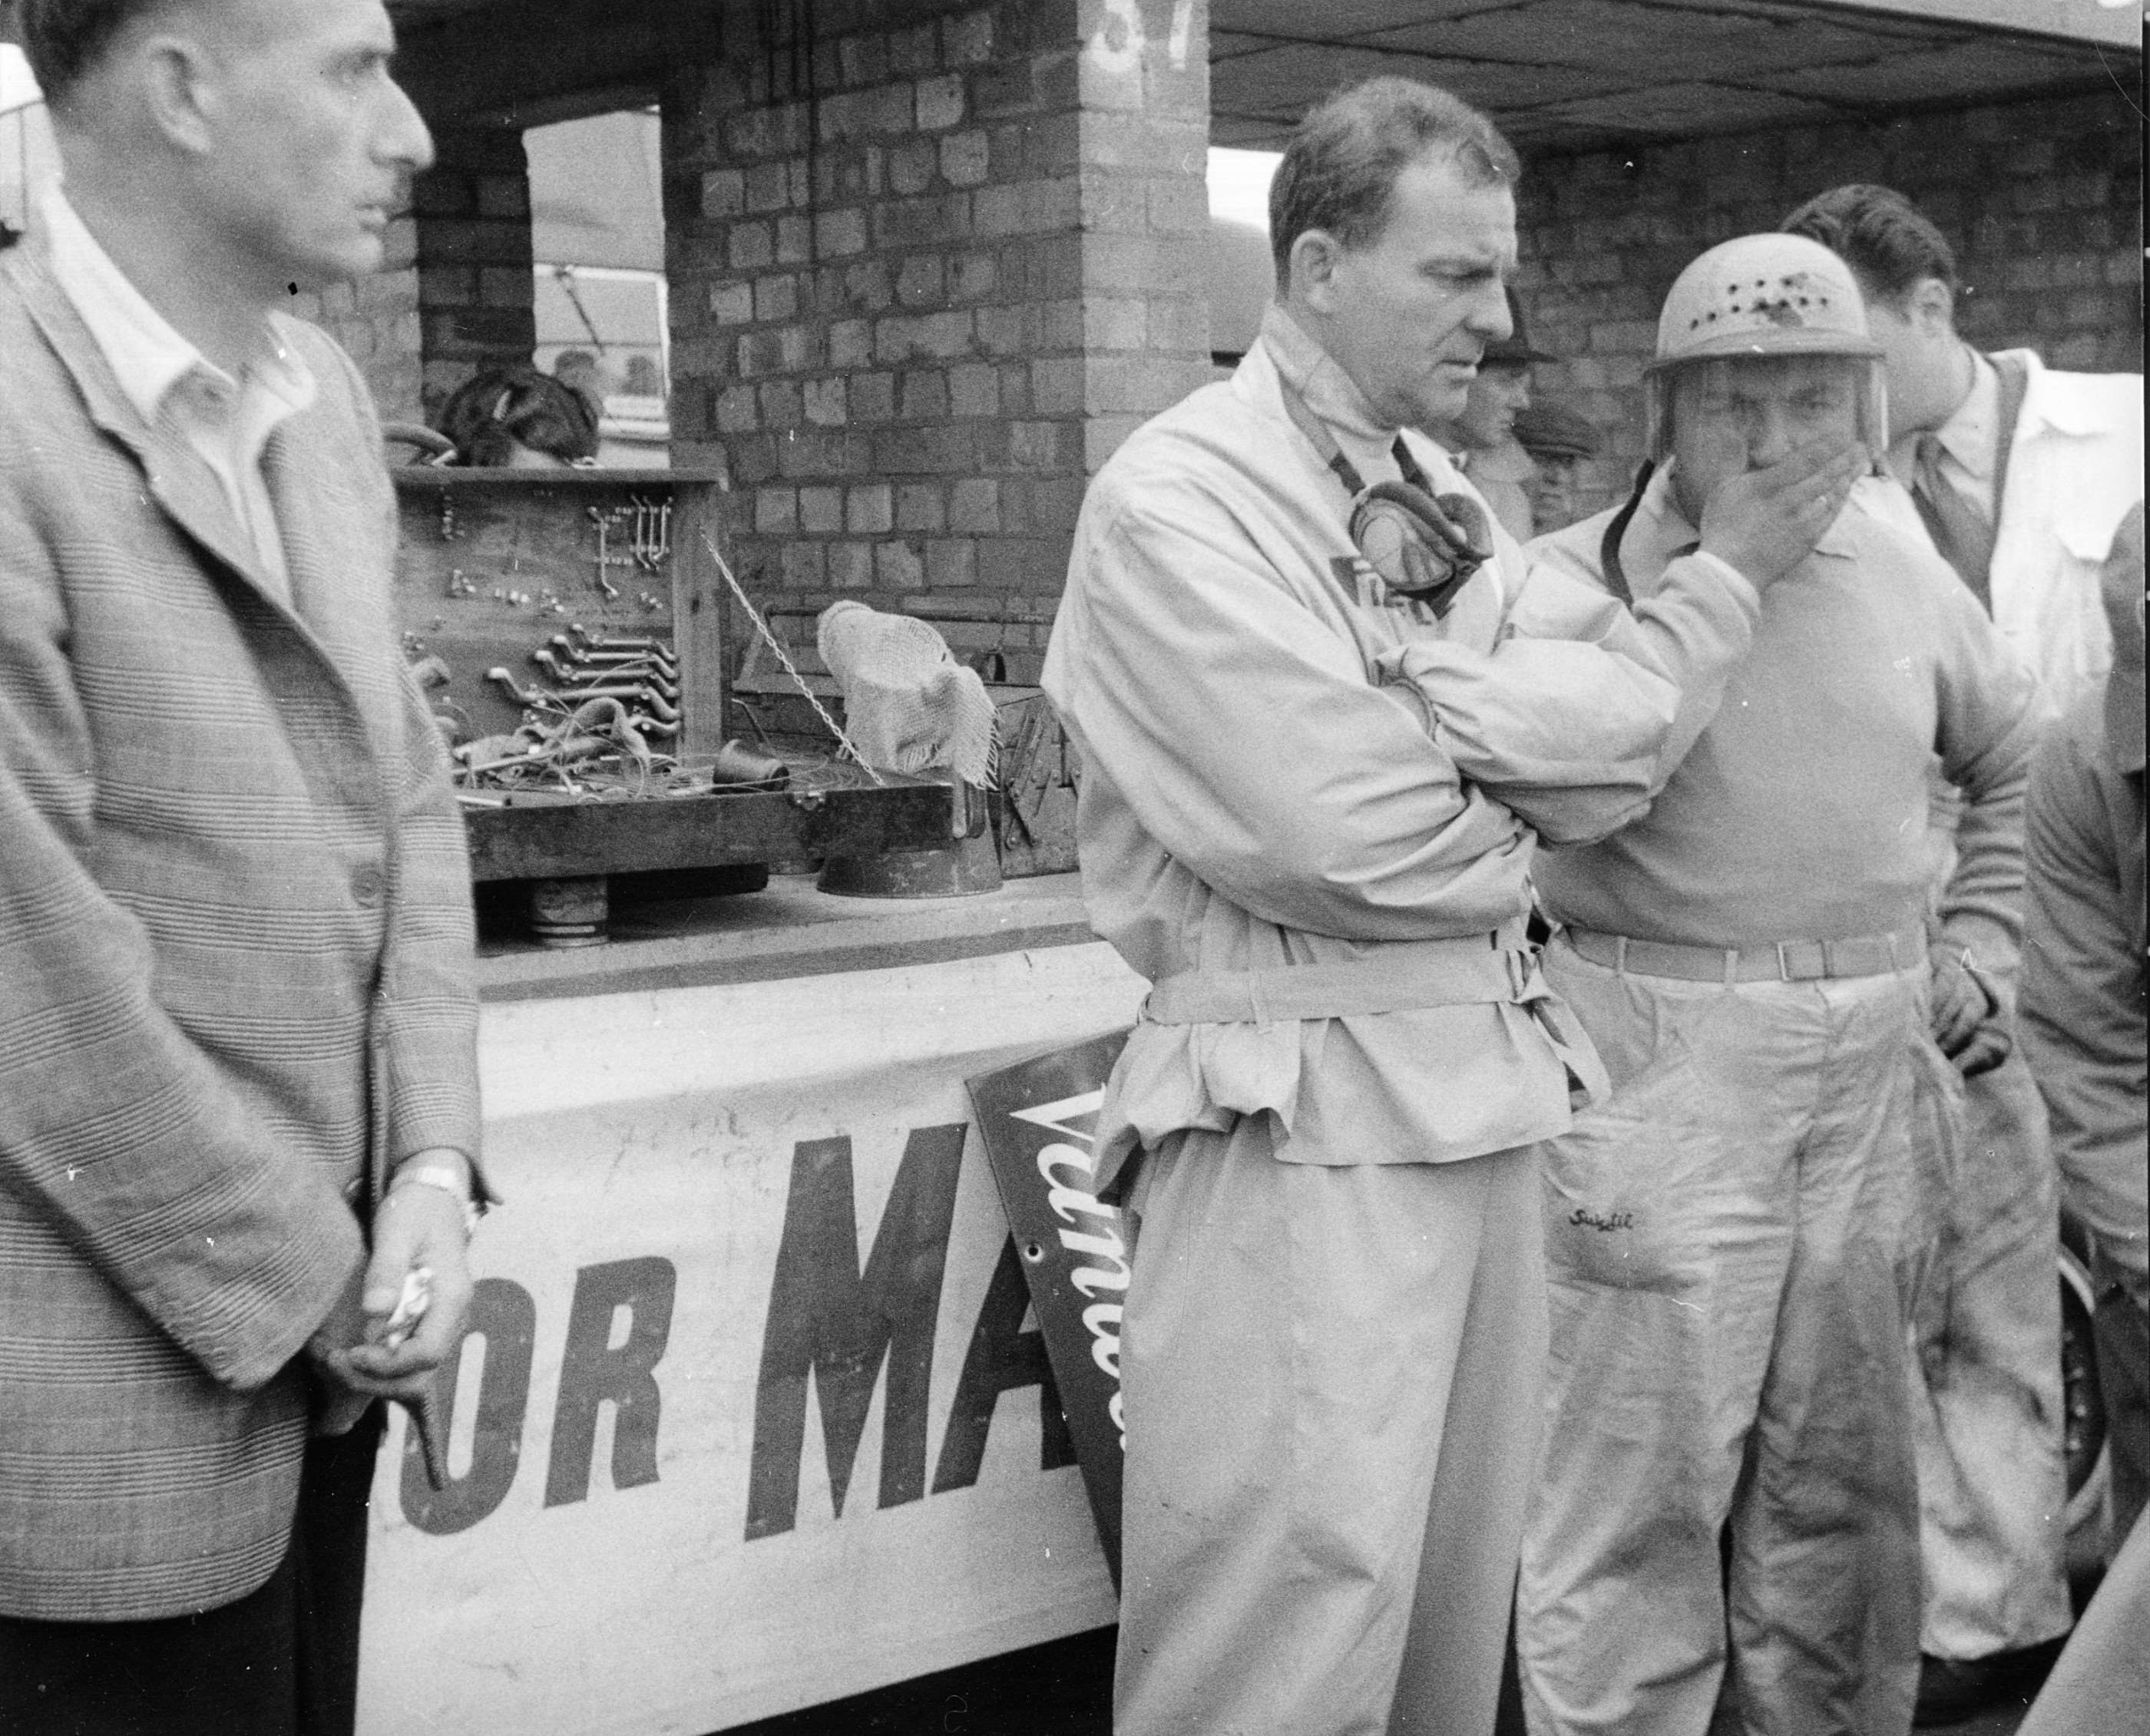 David Yorke, team manager of Vanwall, with drivers Harry Schell and (right) Jose Froilan Gonzalez - 1956